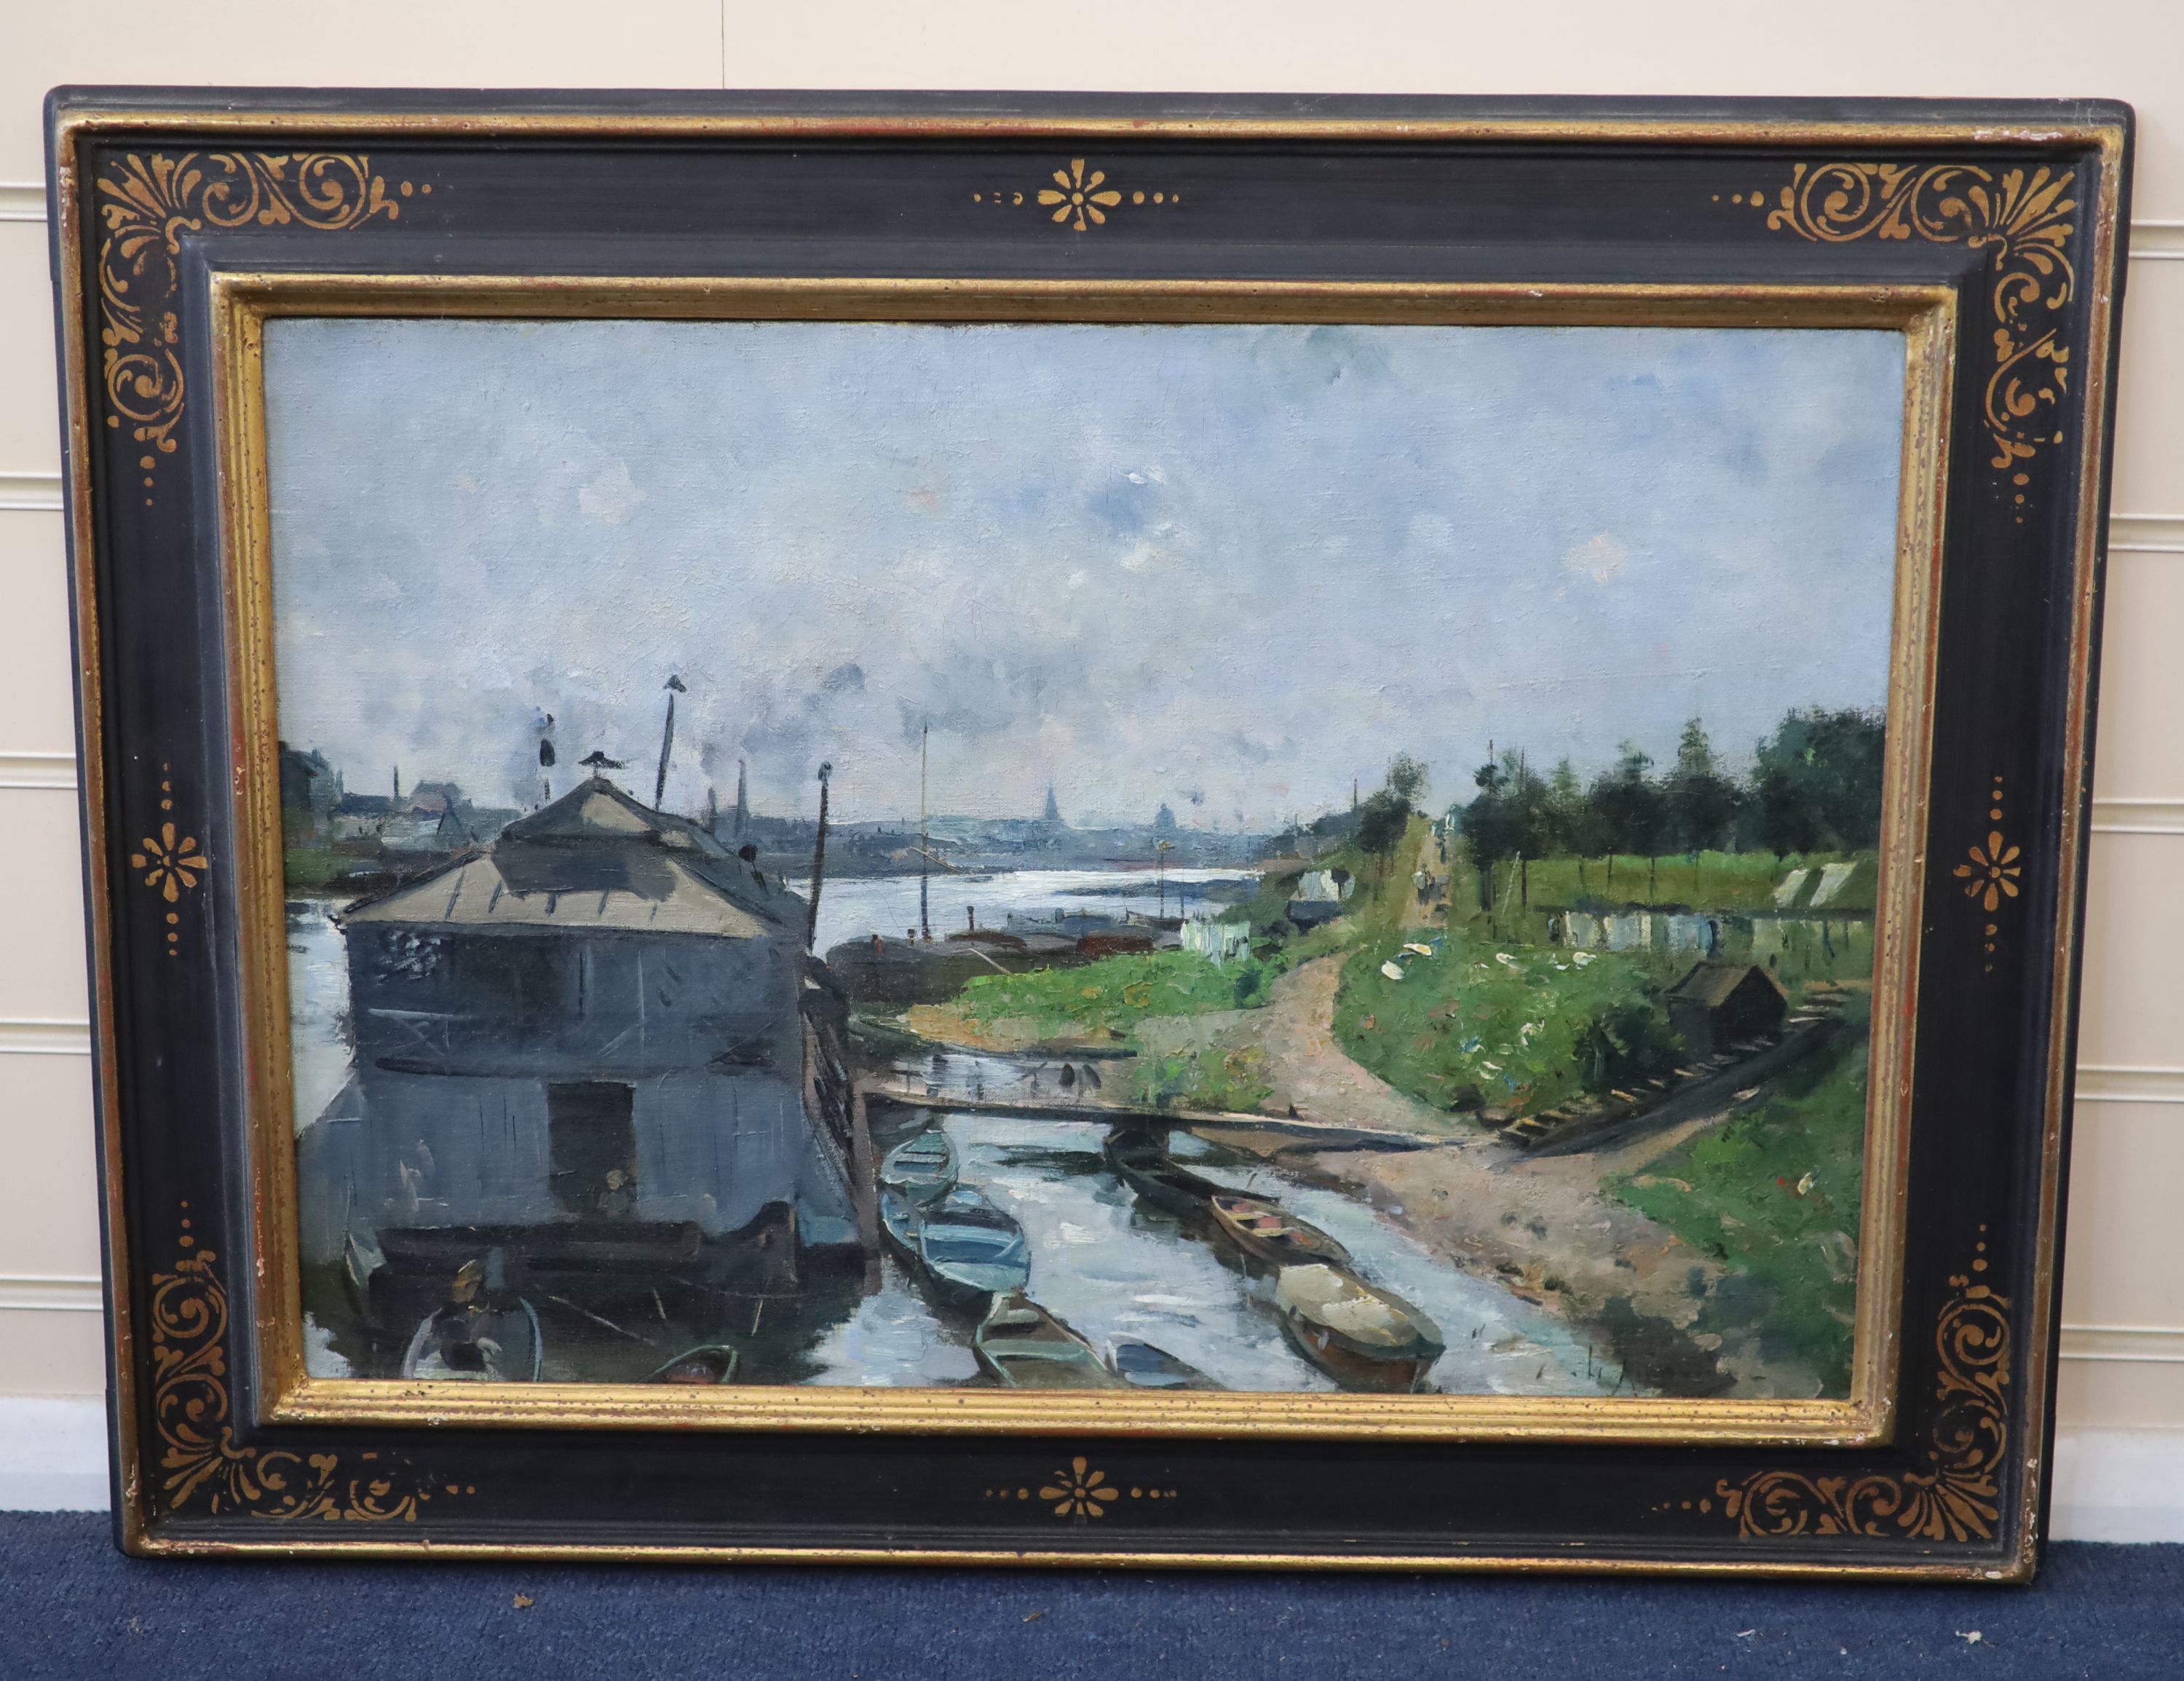 French School c.1890, Houseboats on a French river, possibly Argenteuil., Oil on canvas, 38 x 54cm.